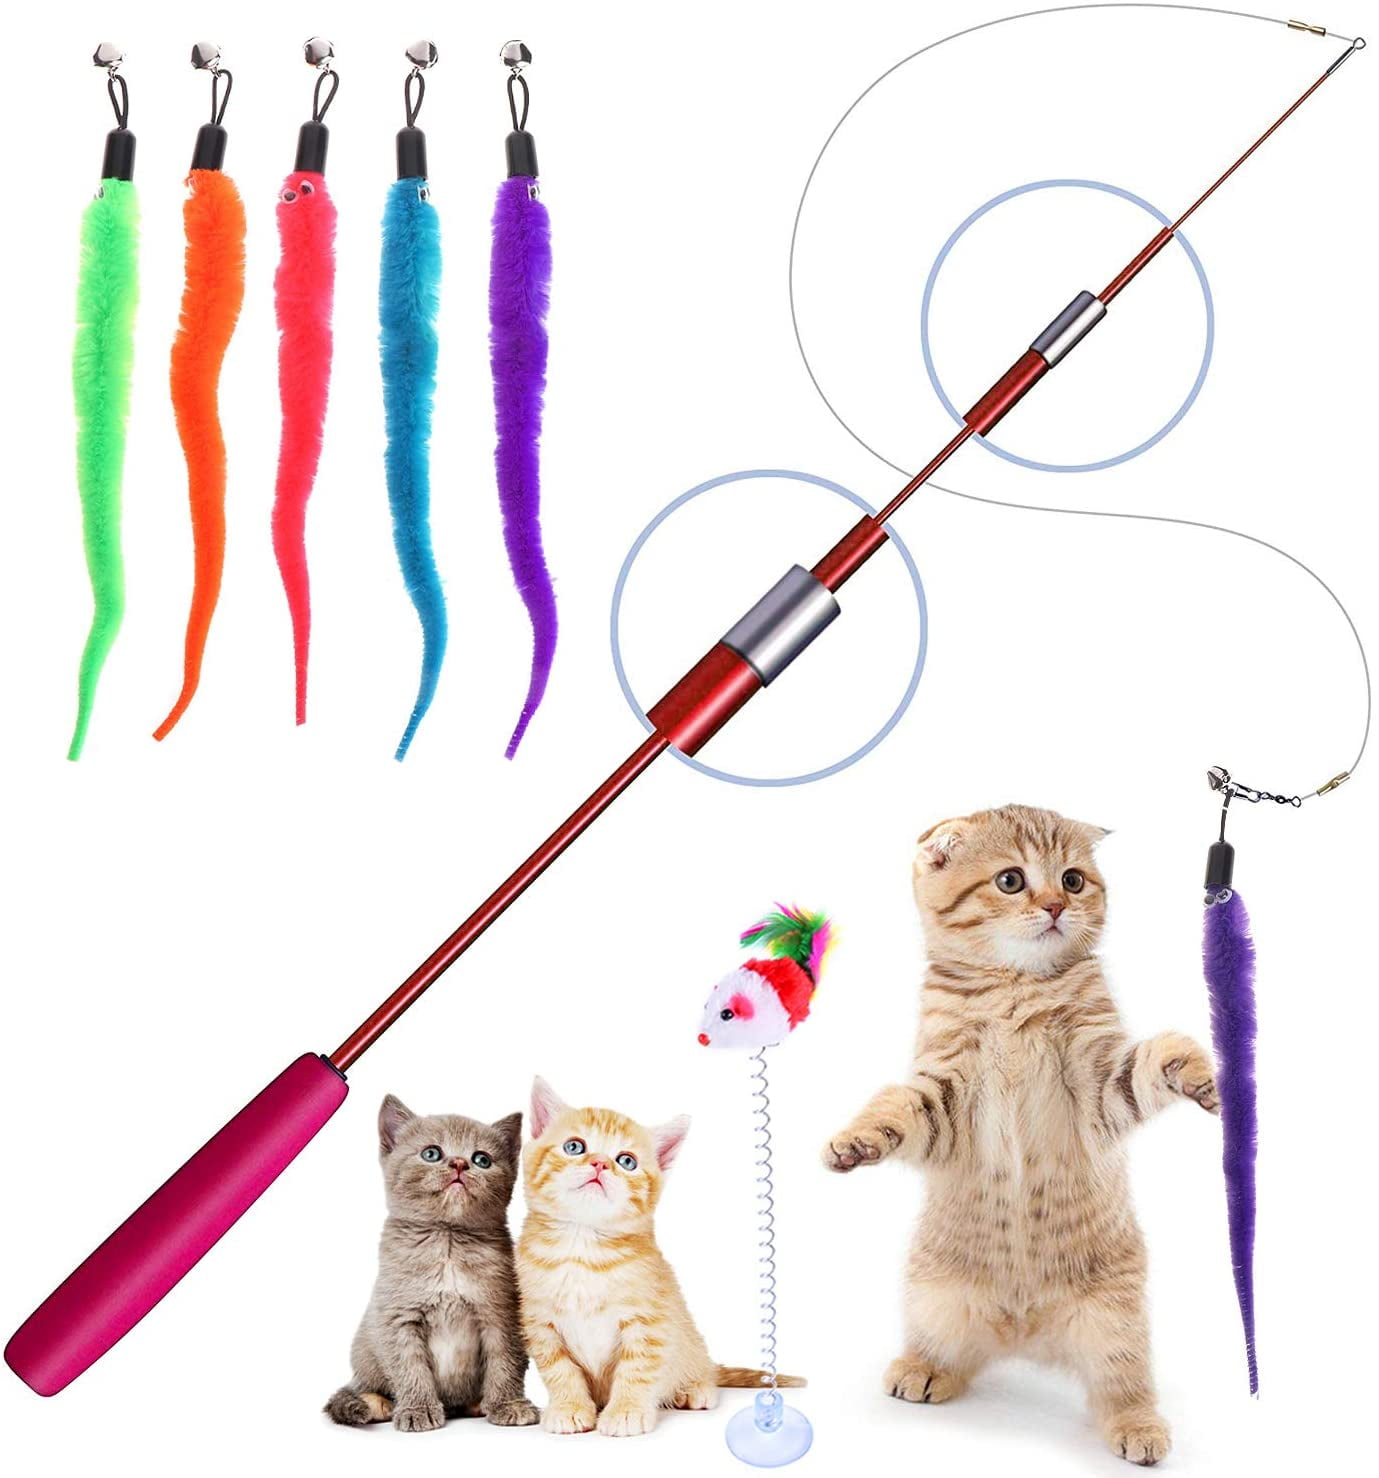 5 x Funny Pet Cat Kitten Toy Mouse Teaser Wand Feather Rod Play Toys Interactive